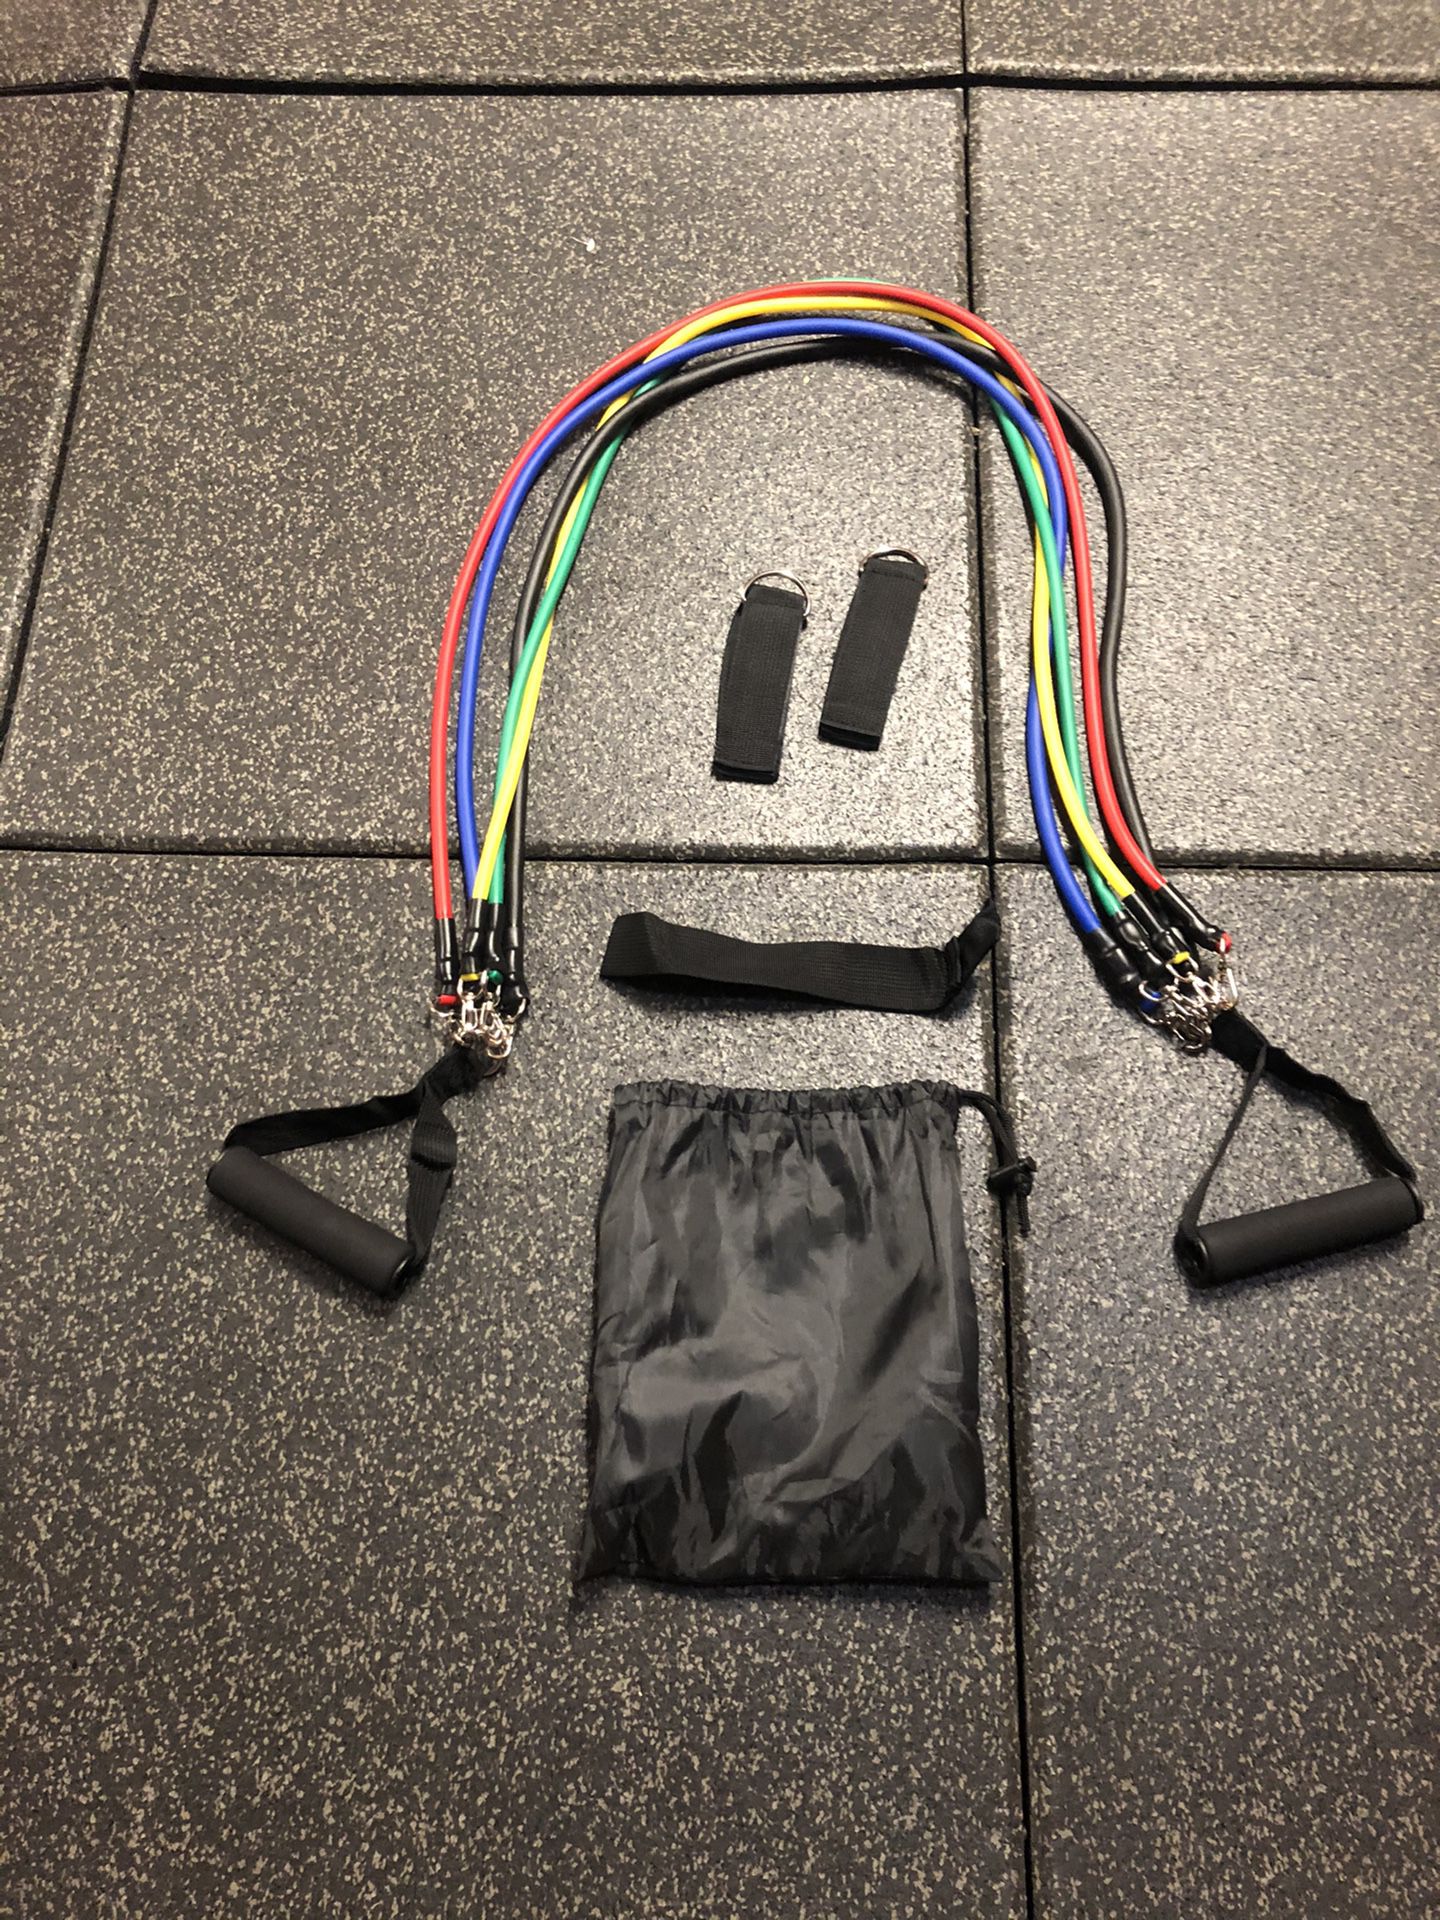 Resistance Bands- New